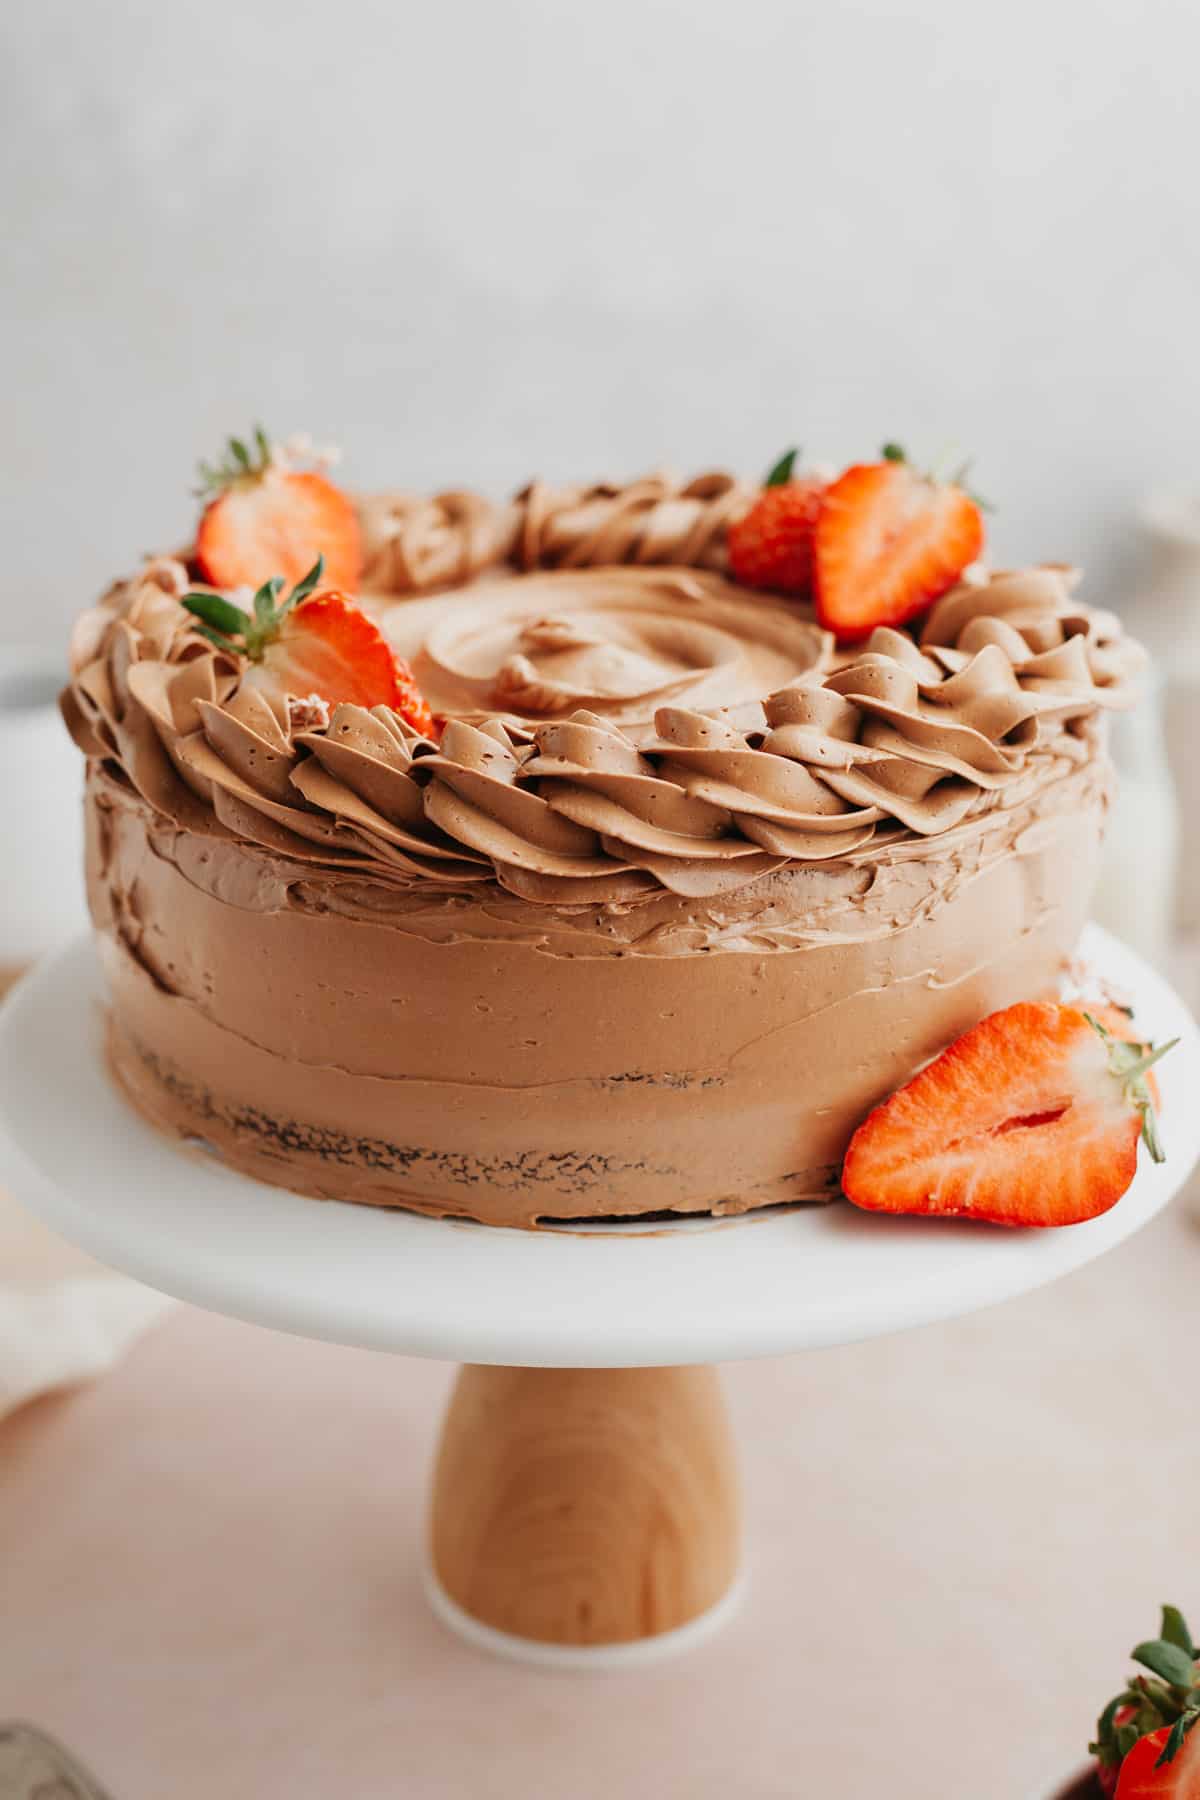 A chocolate cake decorated with strawberries on a white cake stand.